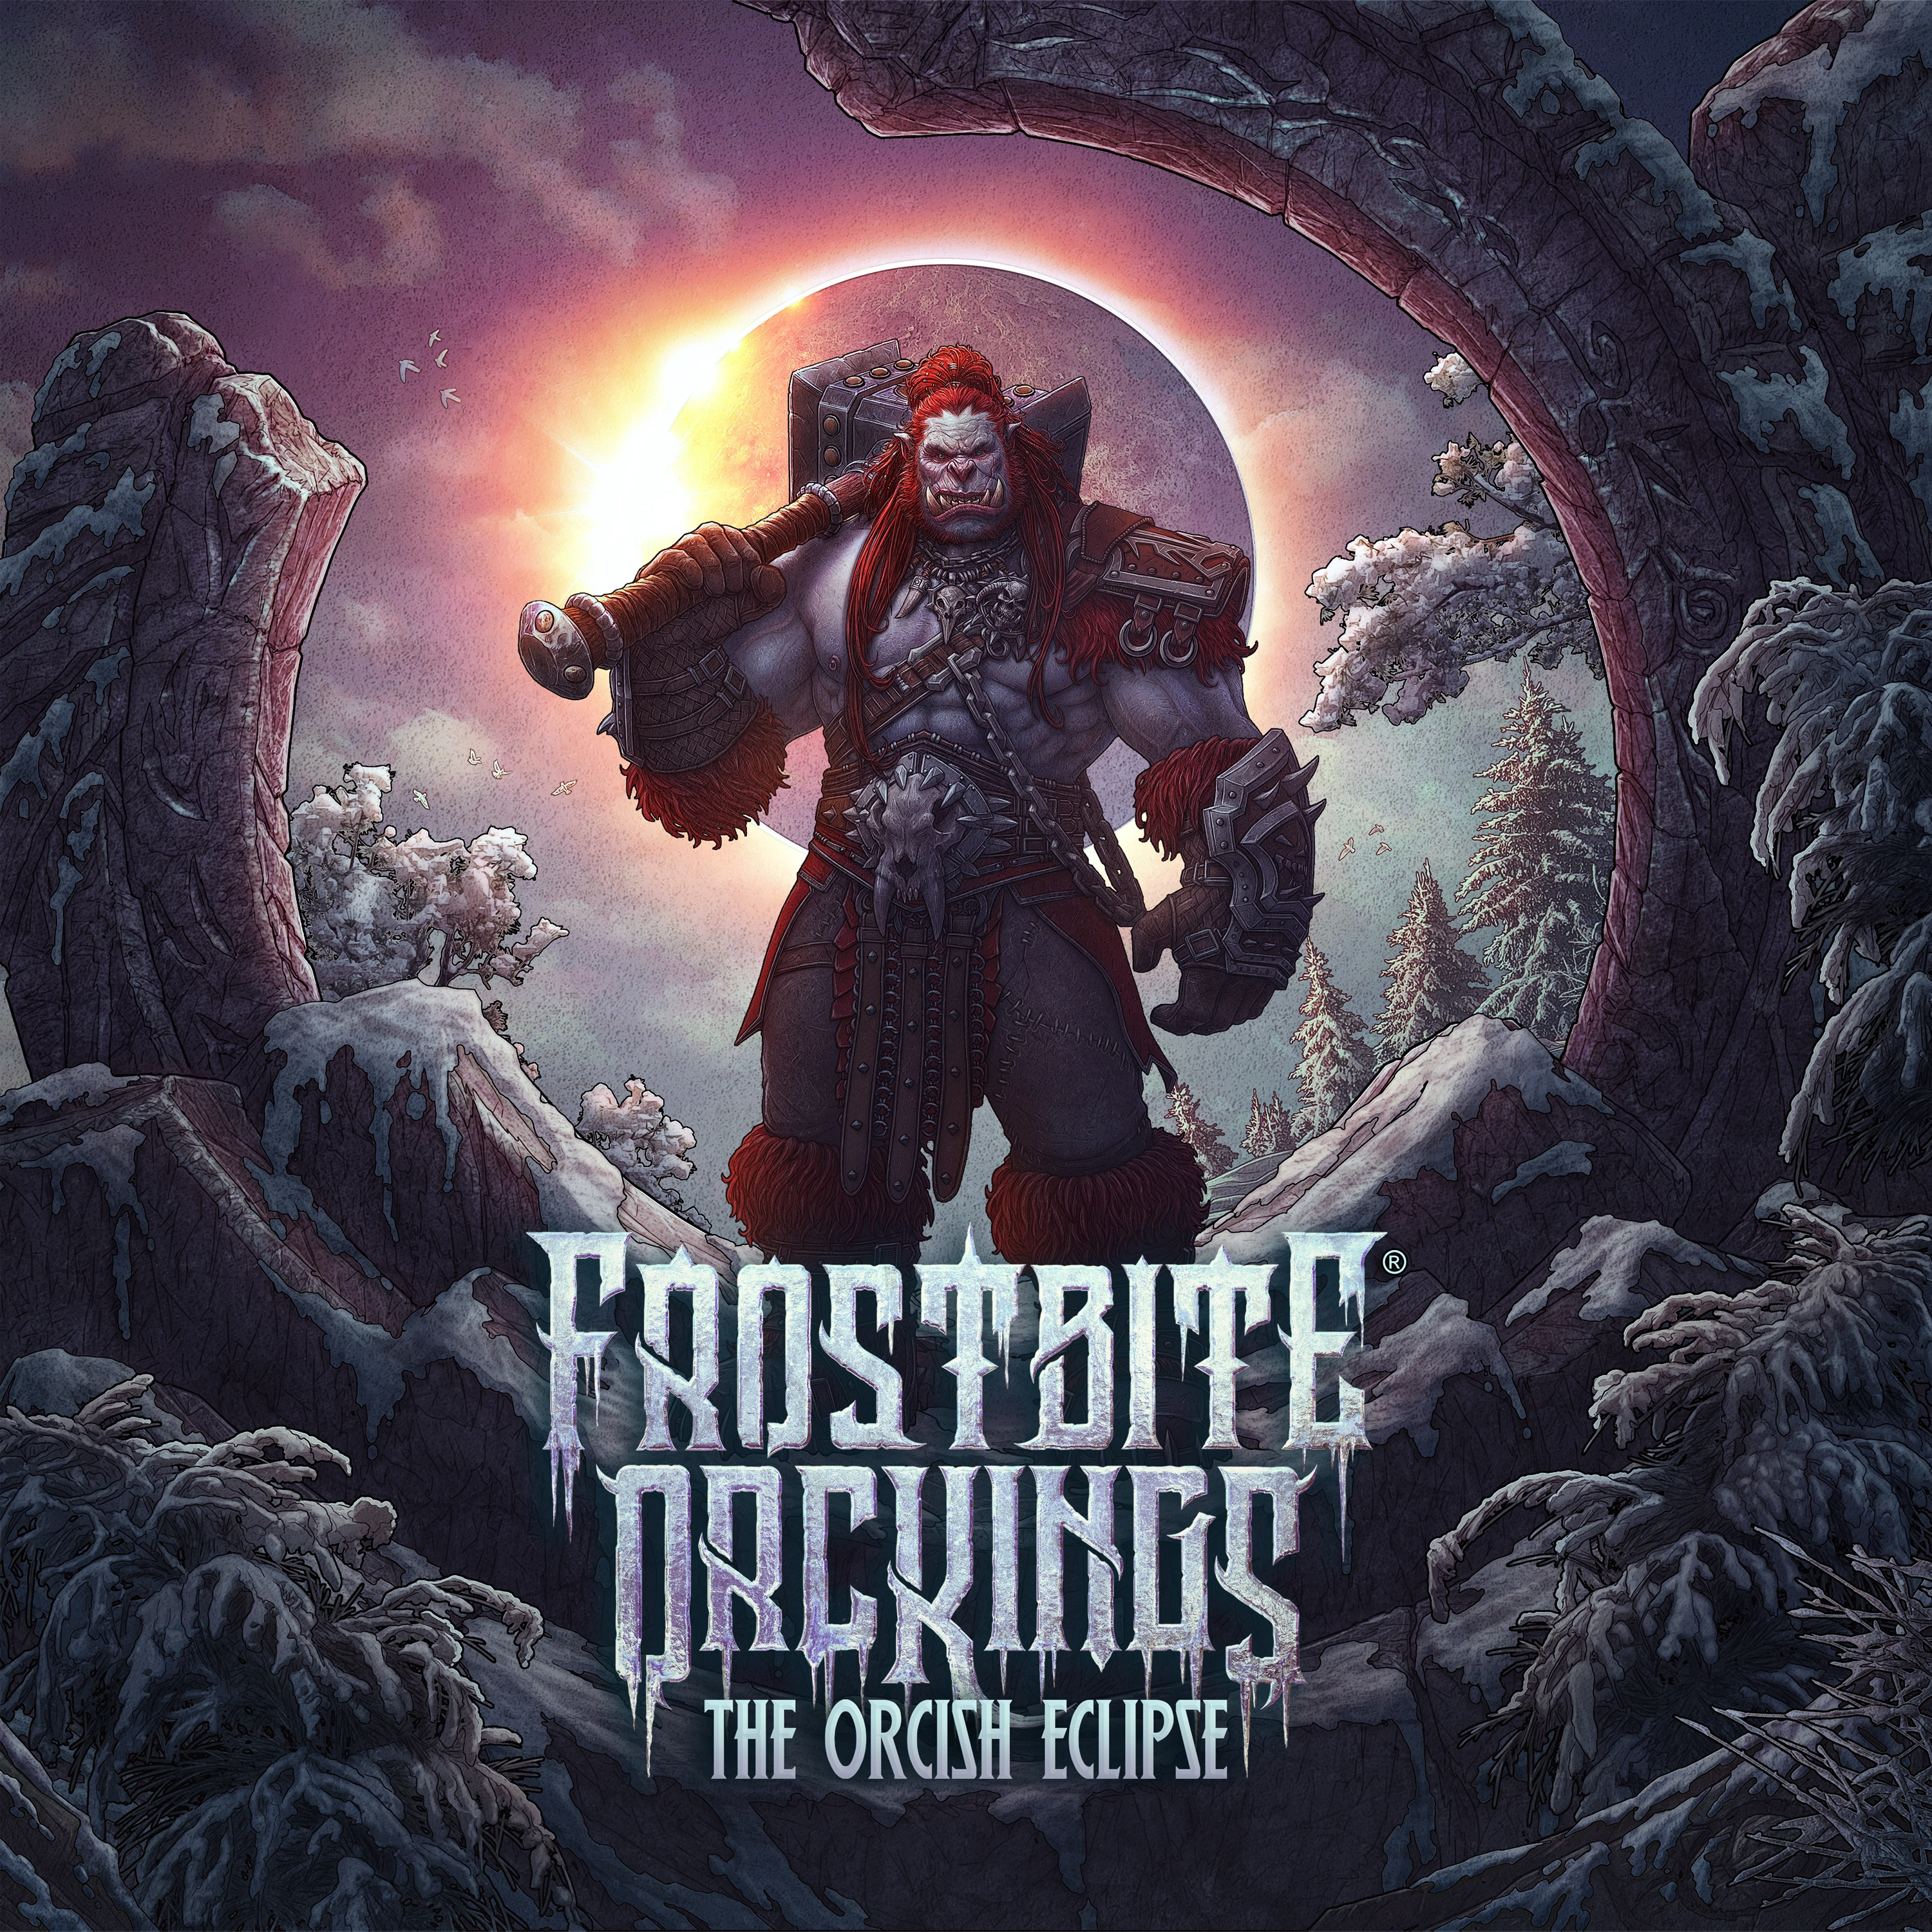 FROSTBITE ORCKINGS - The Orcish Eclipse [ECLIPSE PINK VINYL LP]